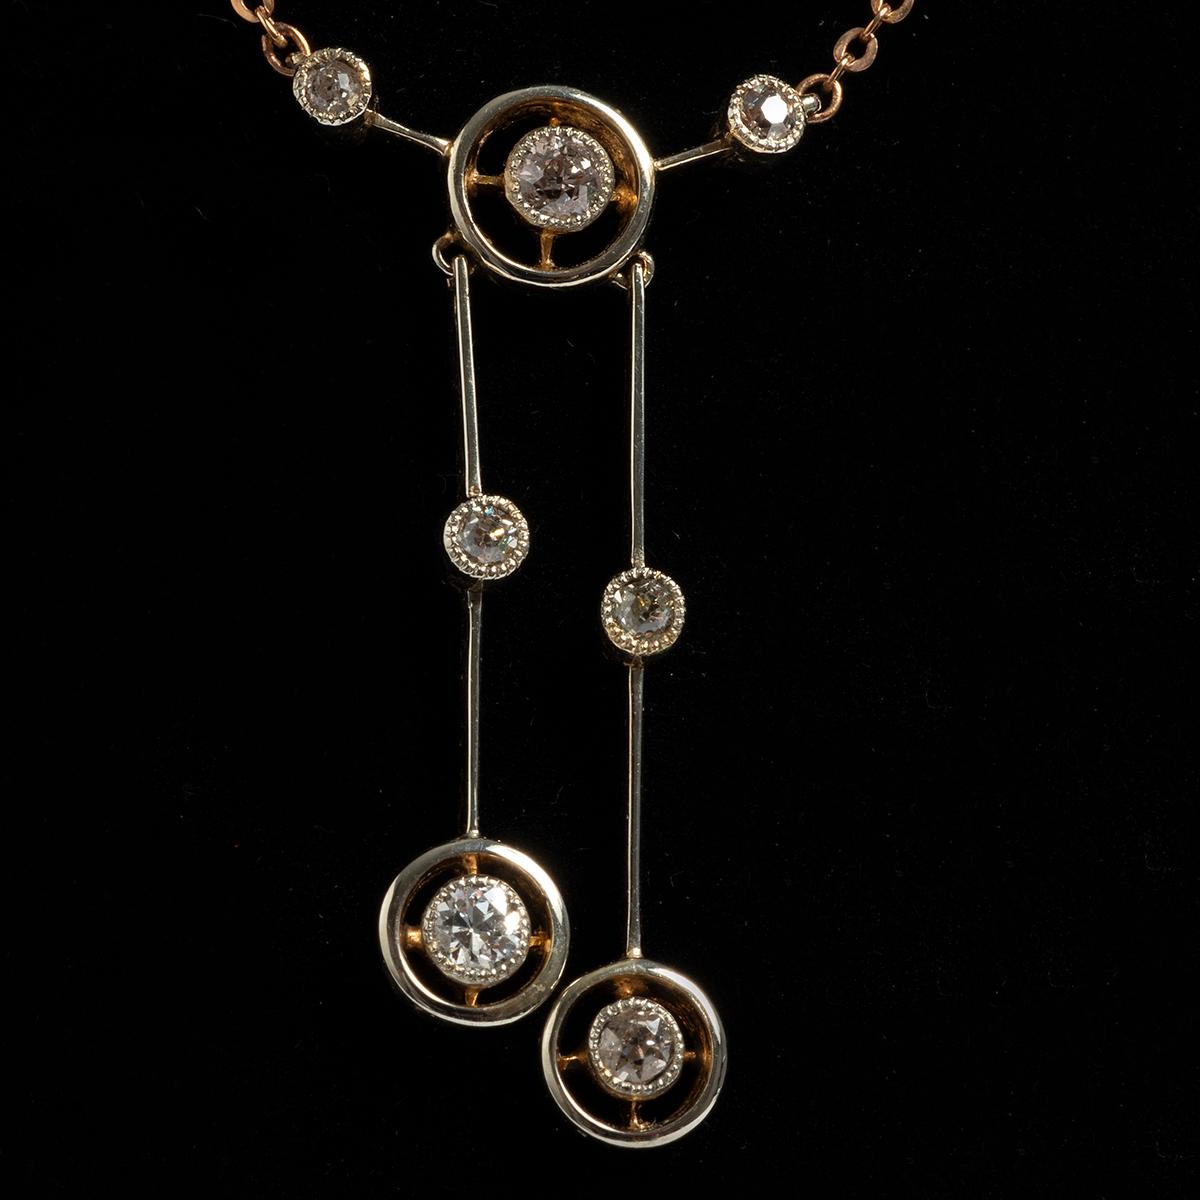 A unique piece within our carefully curated Vintage & Prestige fine jewellery collection, we are delighted to present the following: 
This pretty antique diamond pendant and chain is from 1900's. Set in 18K Yellow Gold with seven diamonds the